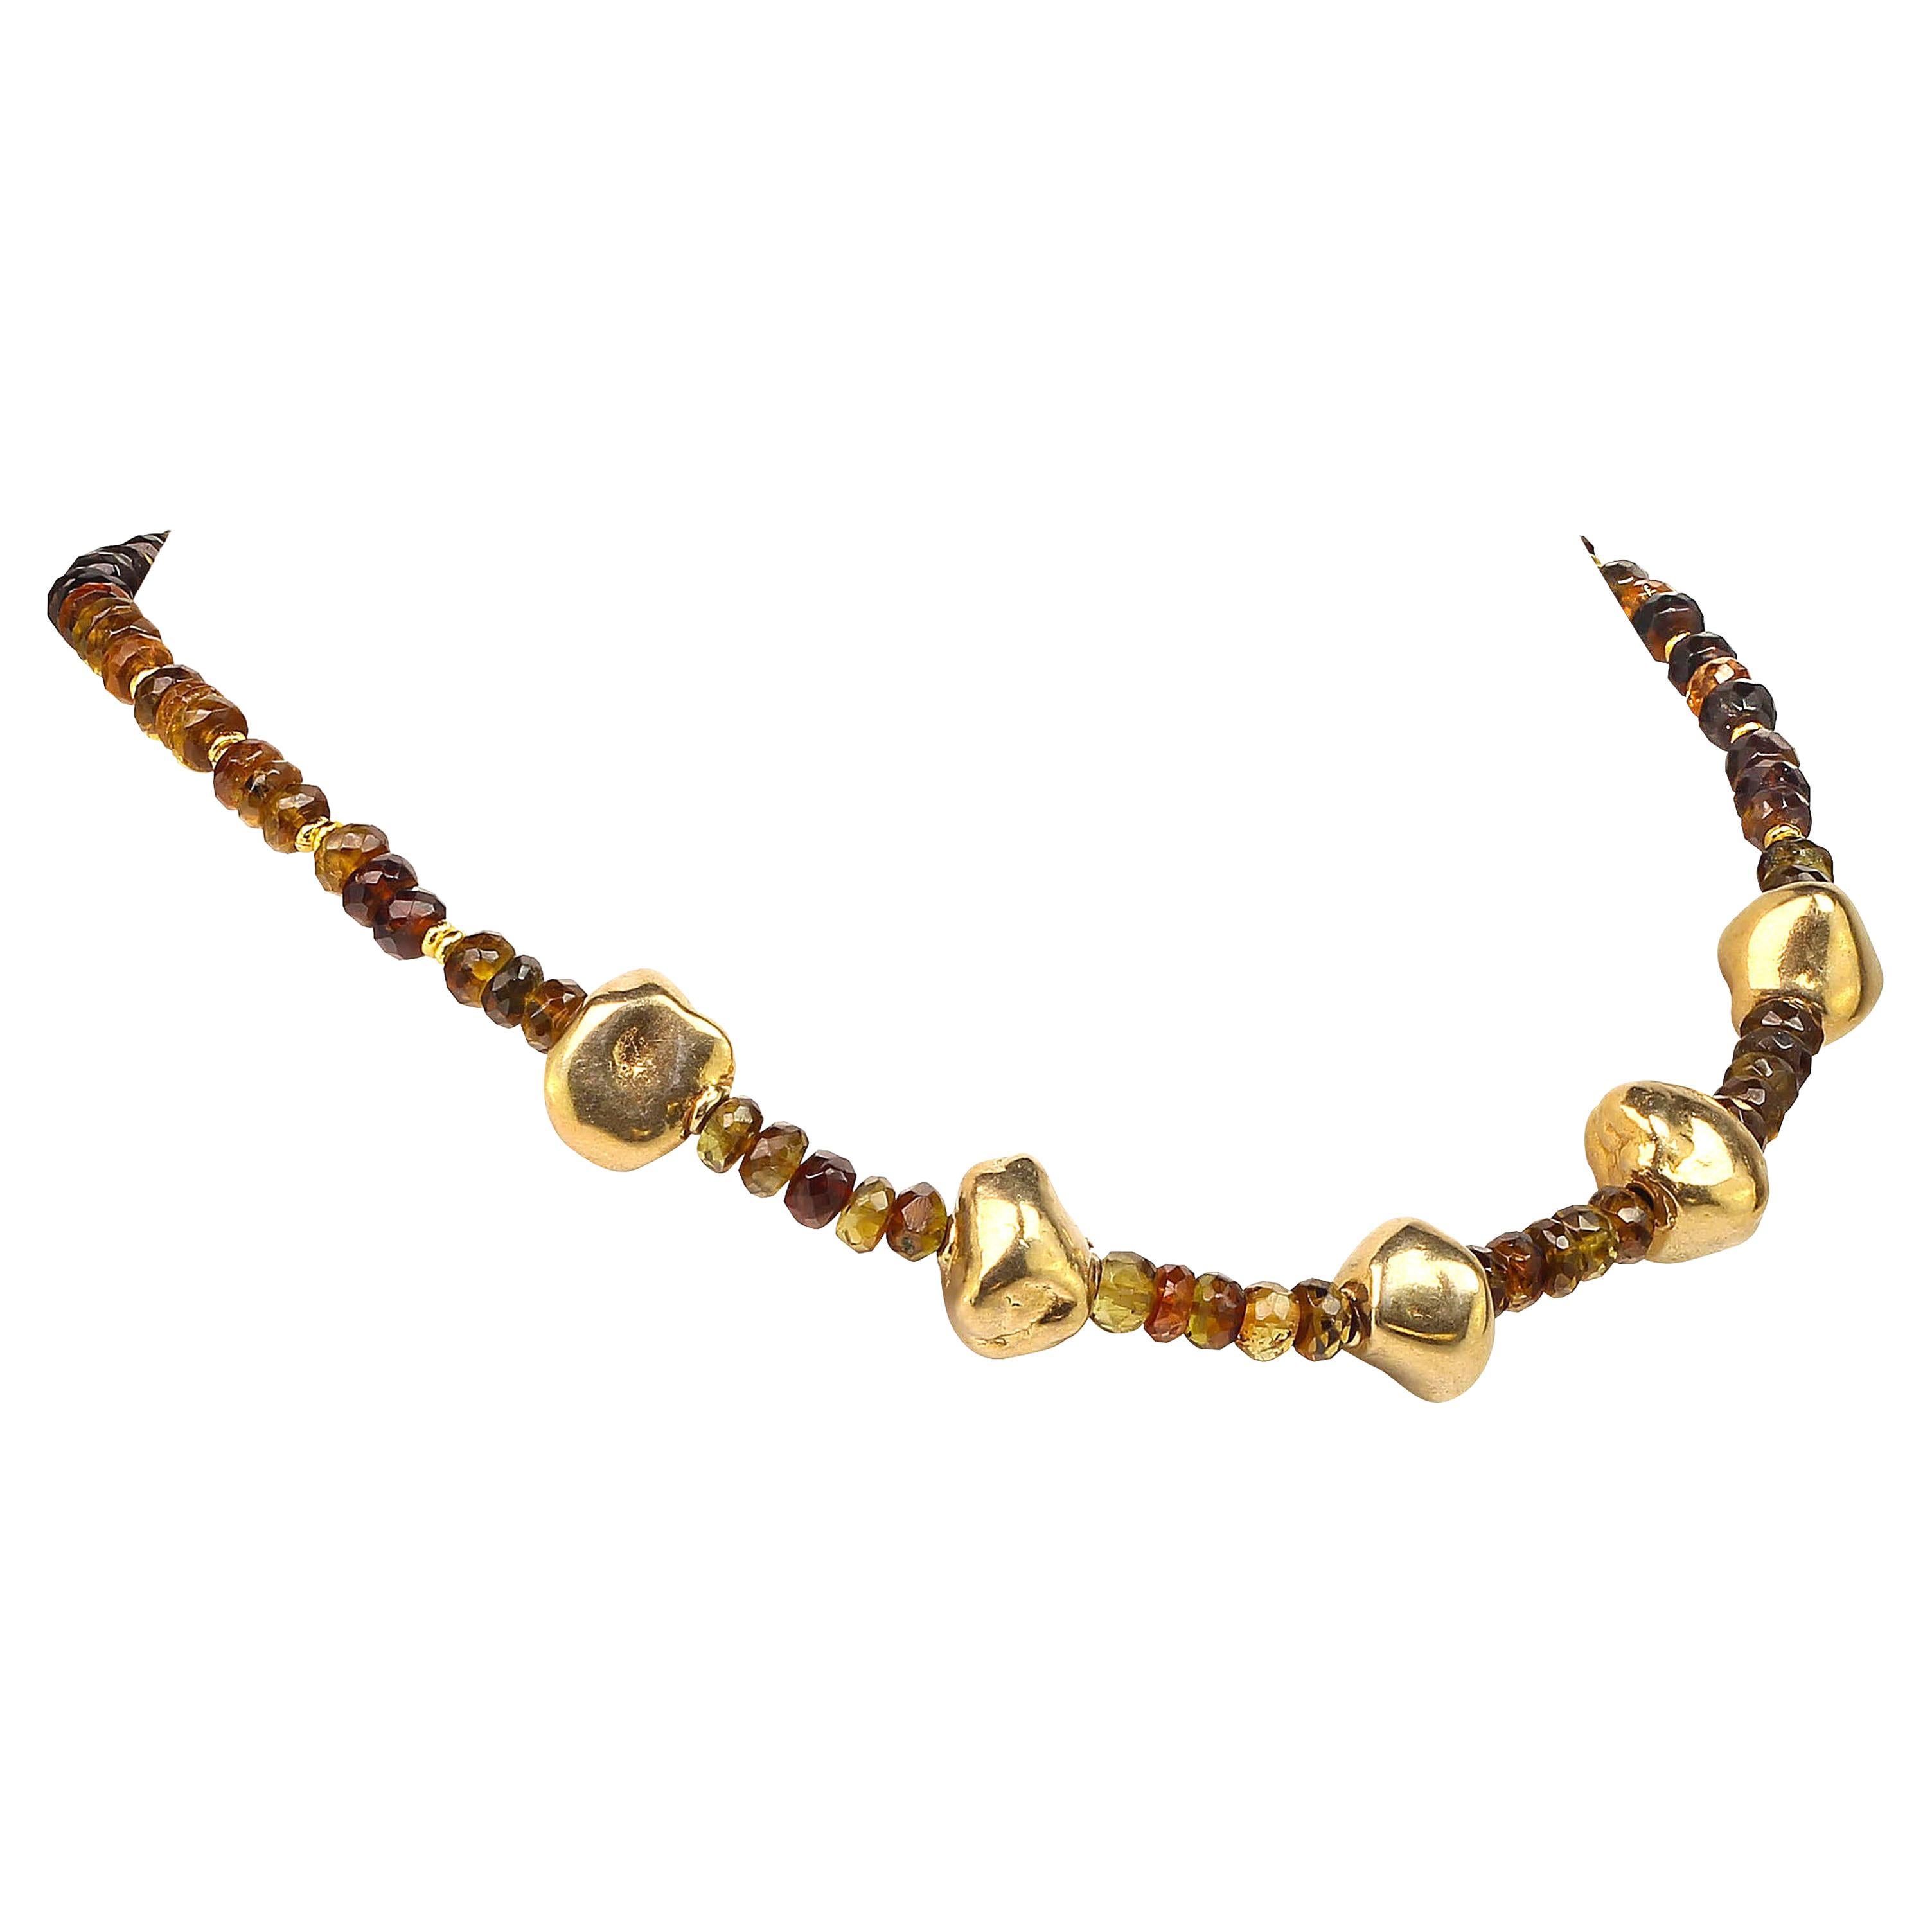 Sparkling, unique choker of Smoky Quartz and Golden Vermeil Nuggets. These glittering Smoky Quartz range from golden to darker brown. This elegant 16 inch choker necklace is designed to complement all skin tones.  The sparkling 5MM faceted Smoky